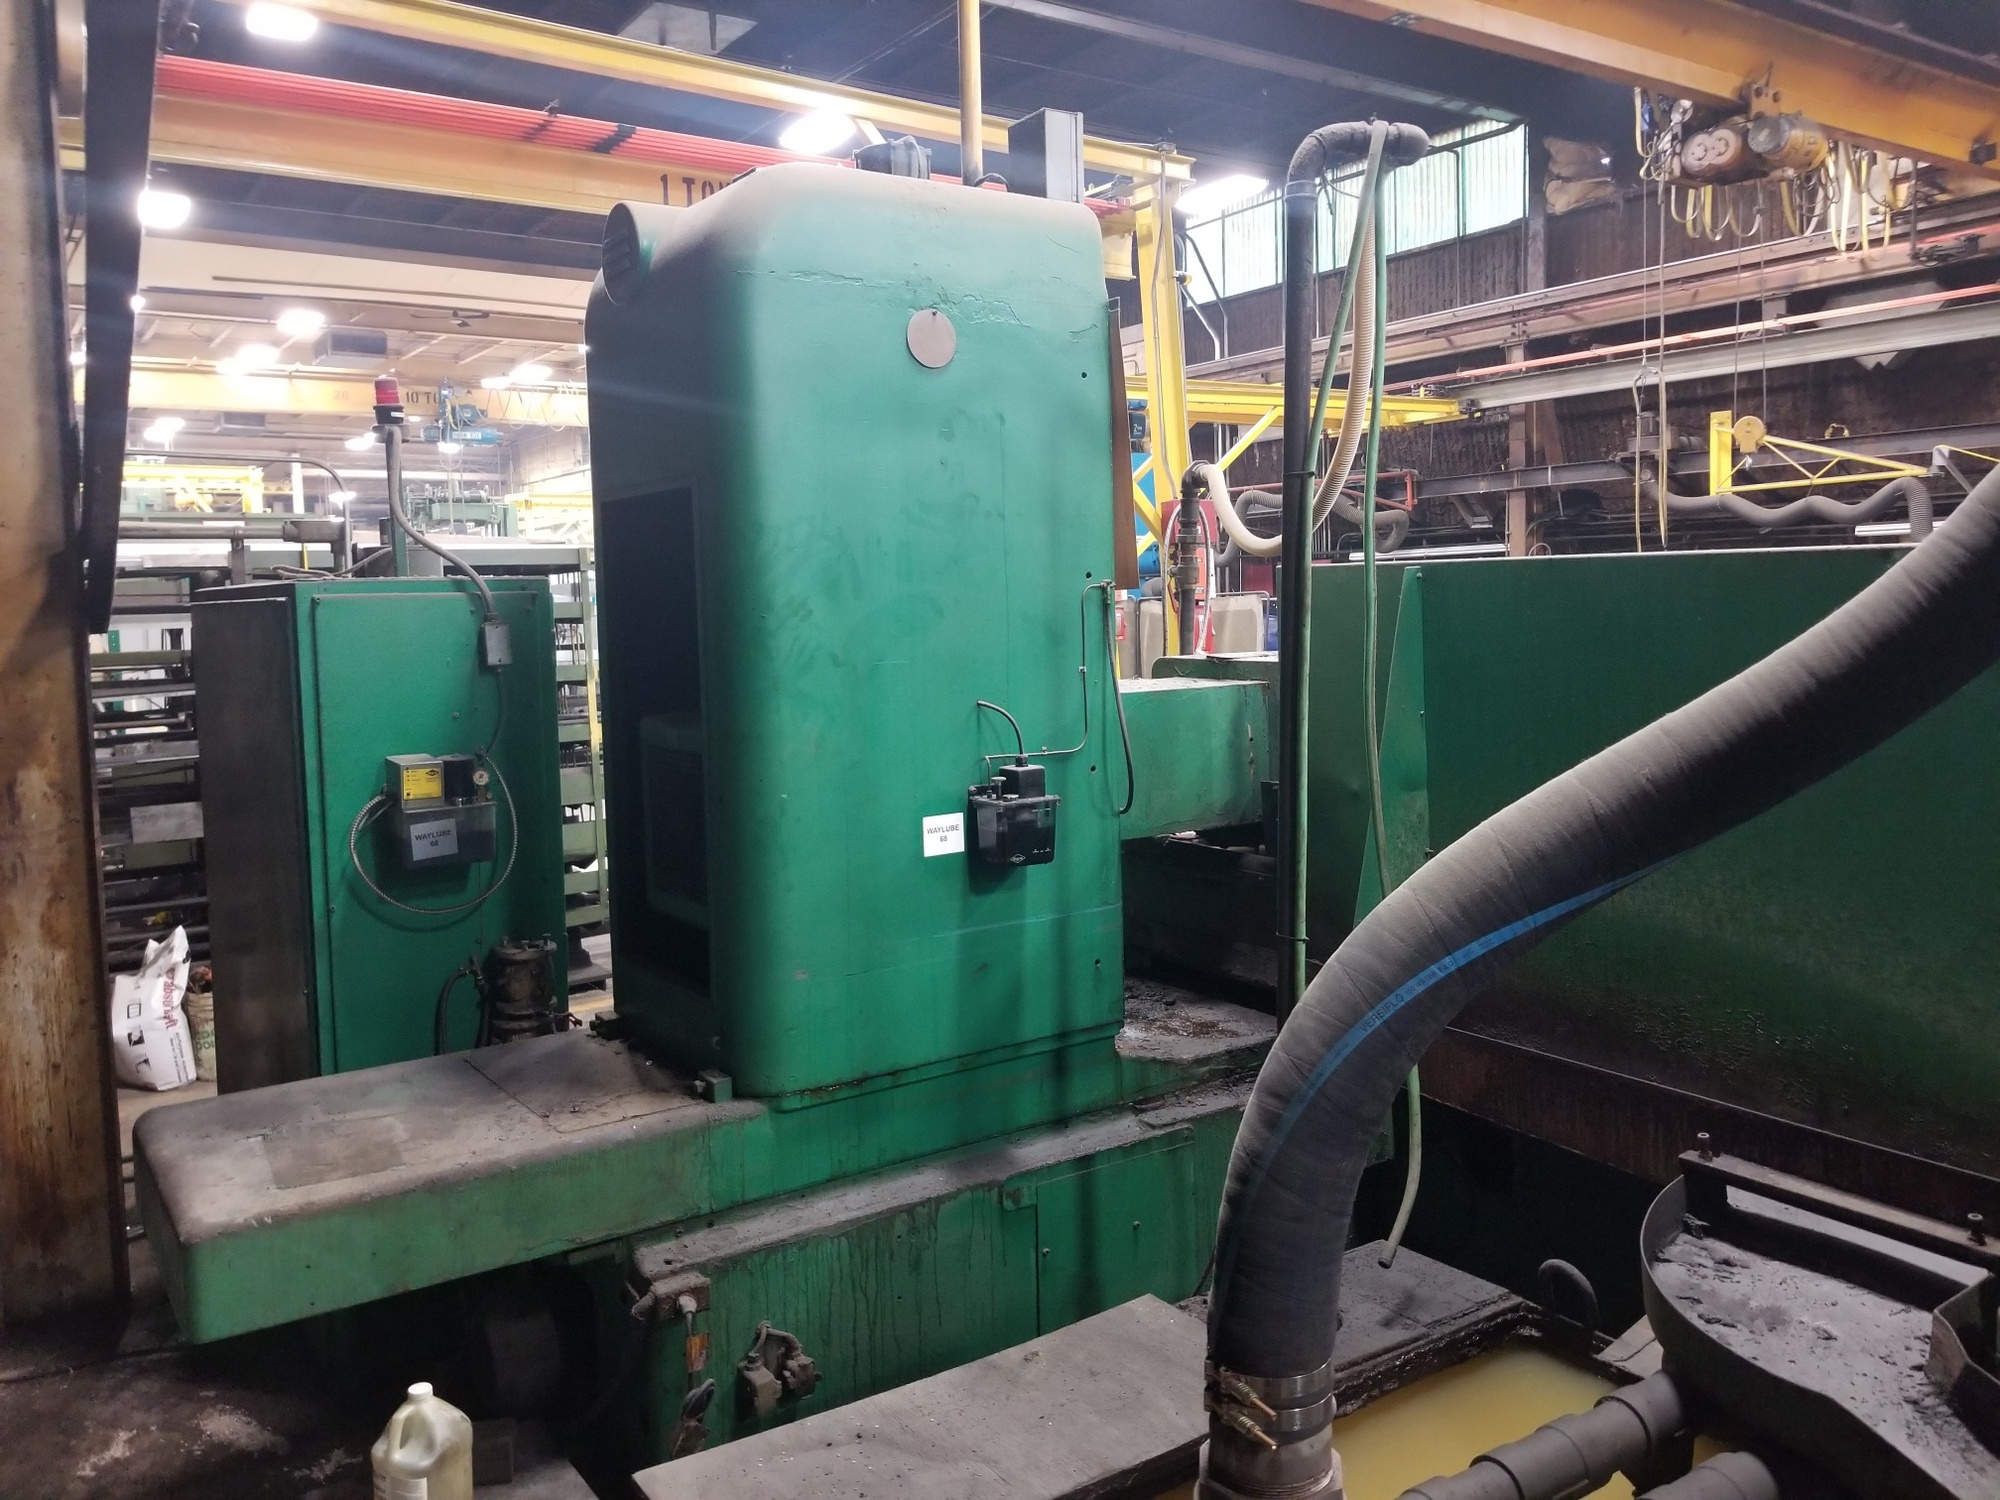 1969 ELB SWD 020 Reciprocating Surface Grinders | Silverlight CNC, Inc